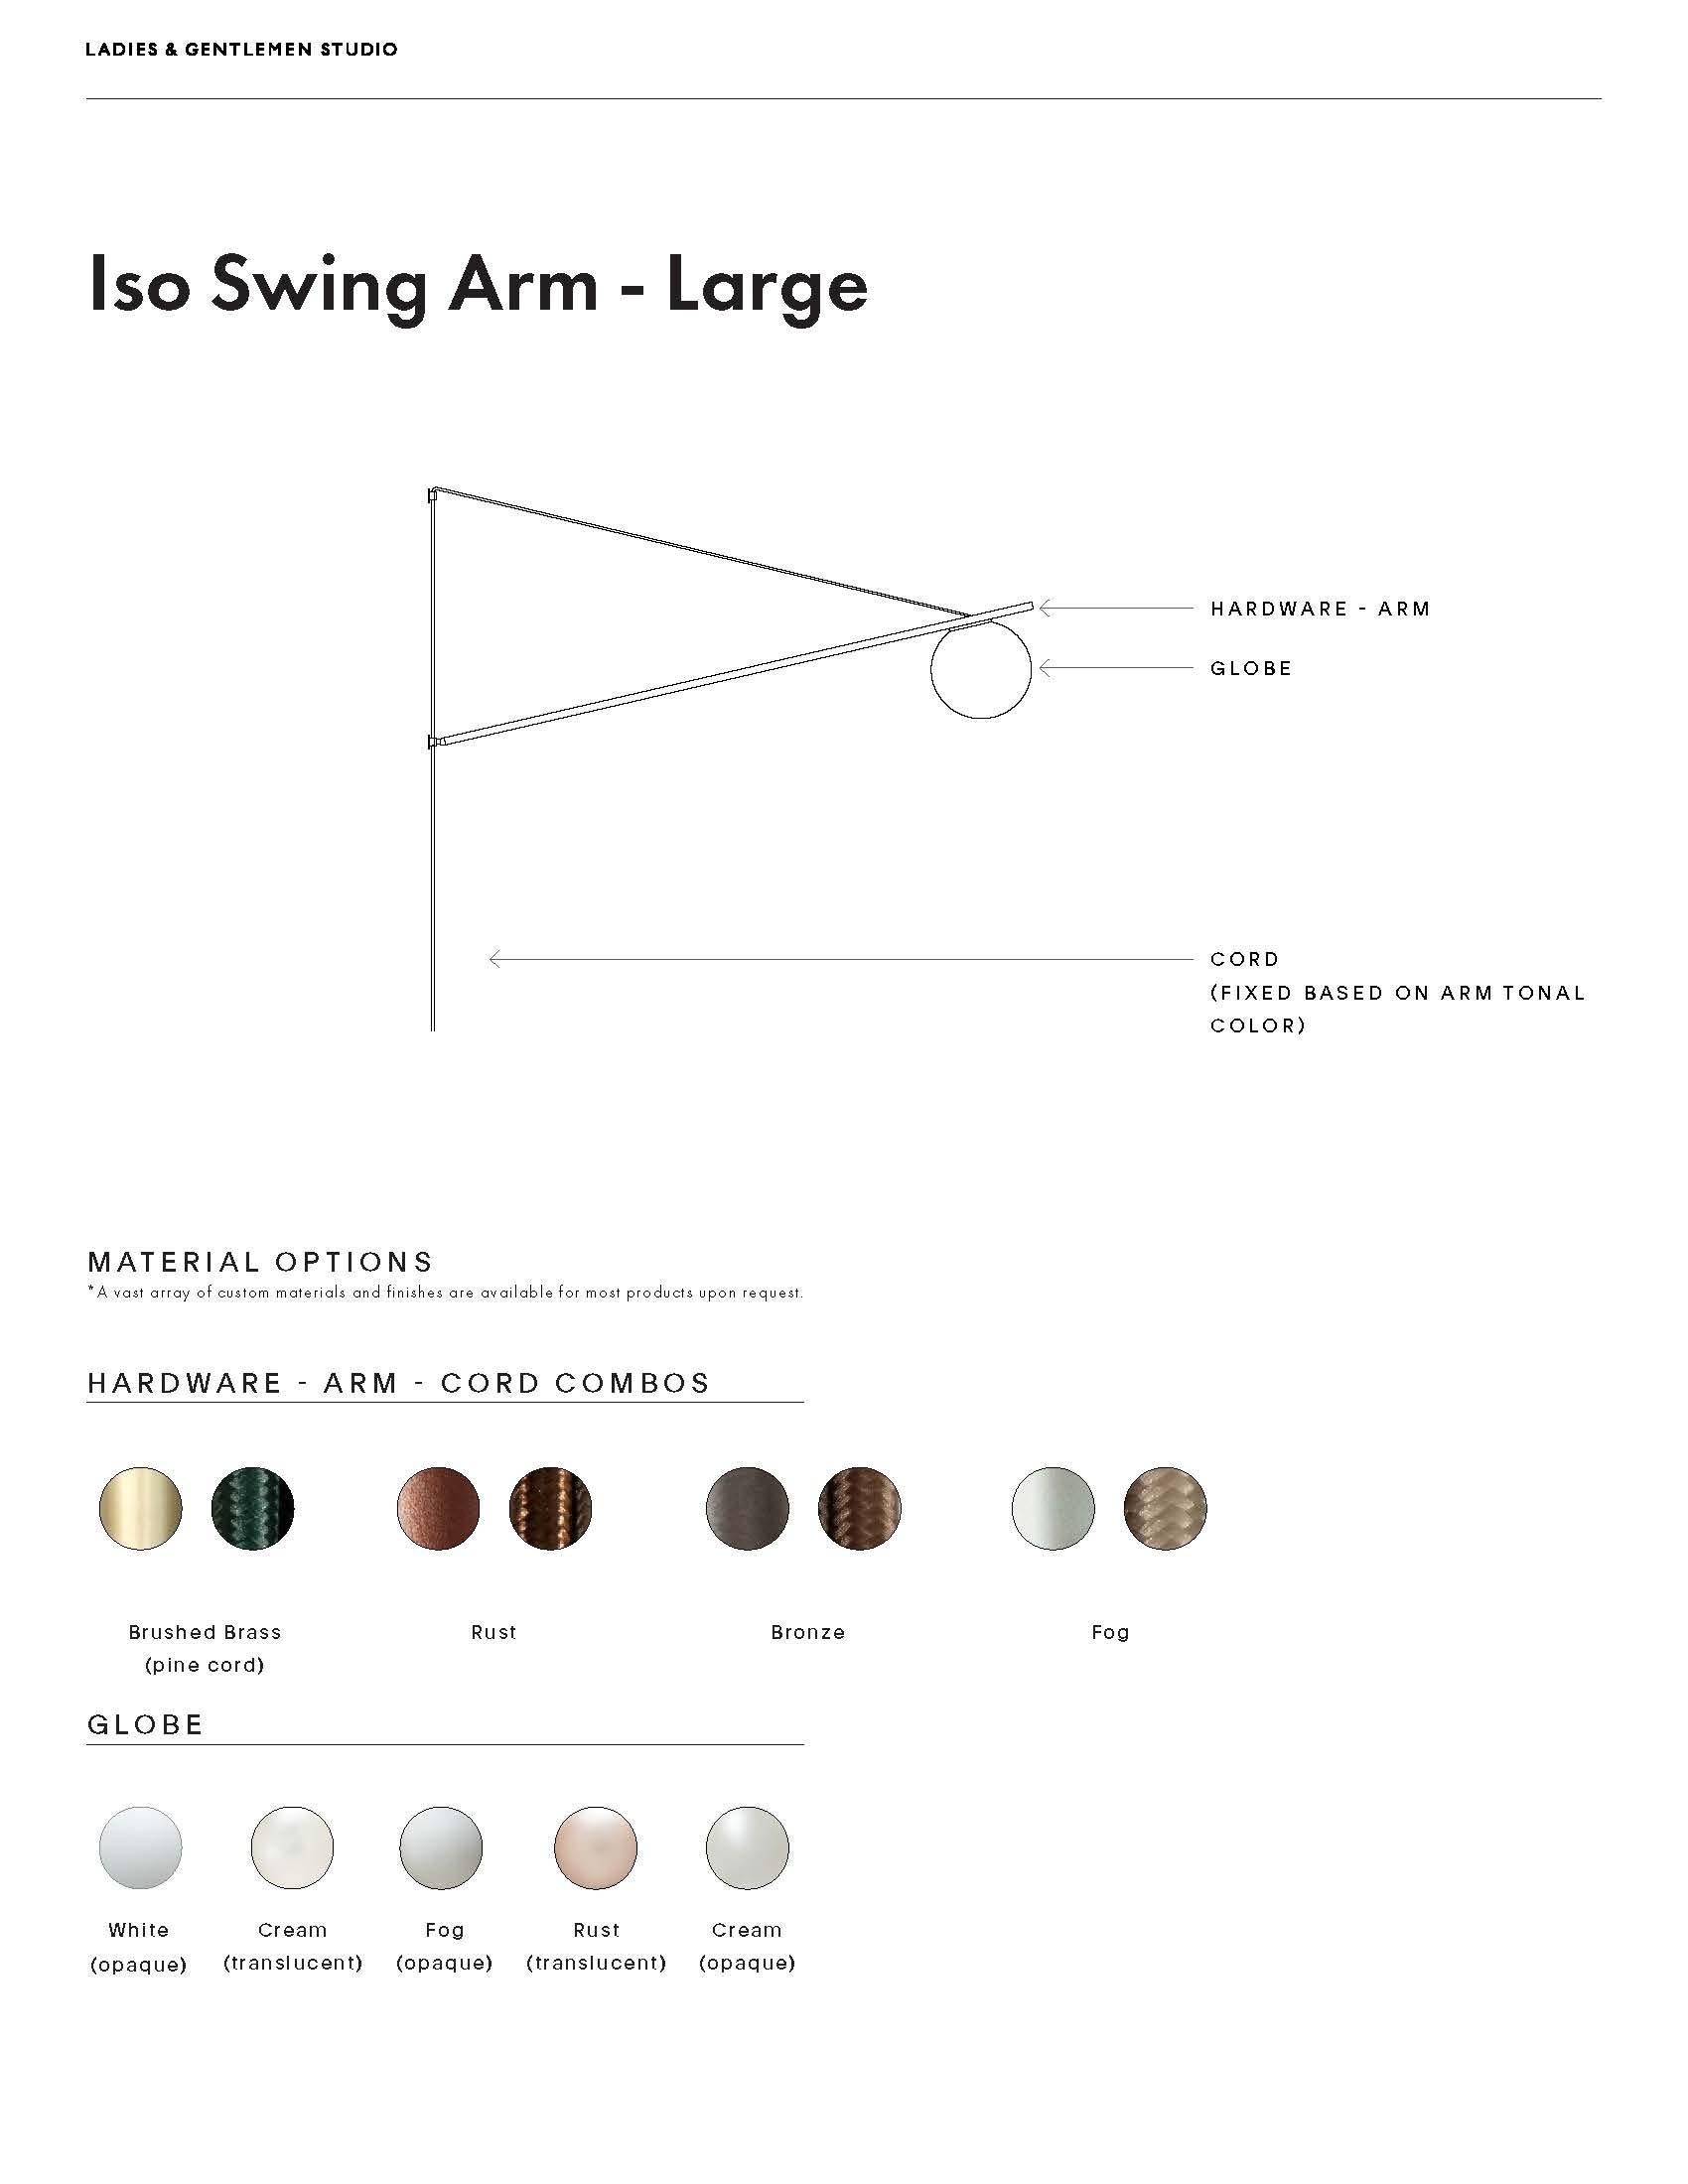 Contemporary ISO Swing Arm Large Sconce in Brass Finish & Color Wash Globe Wall Mount Light For Sale